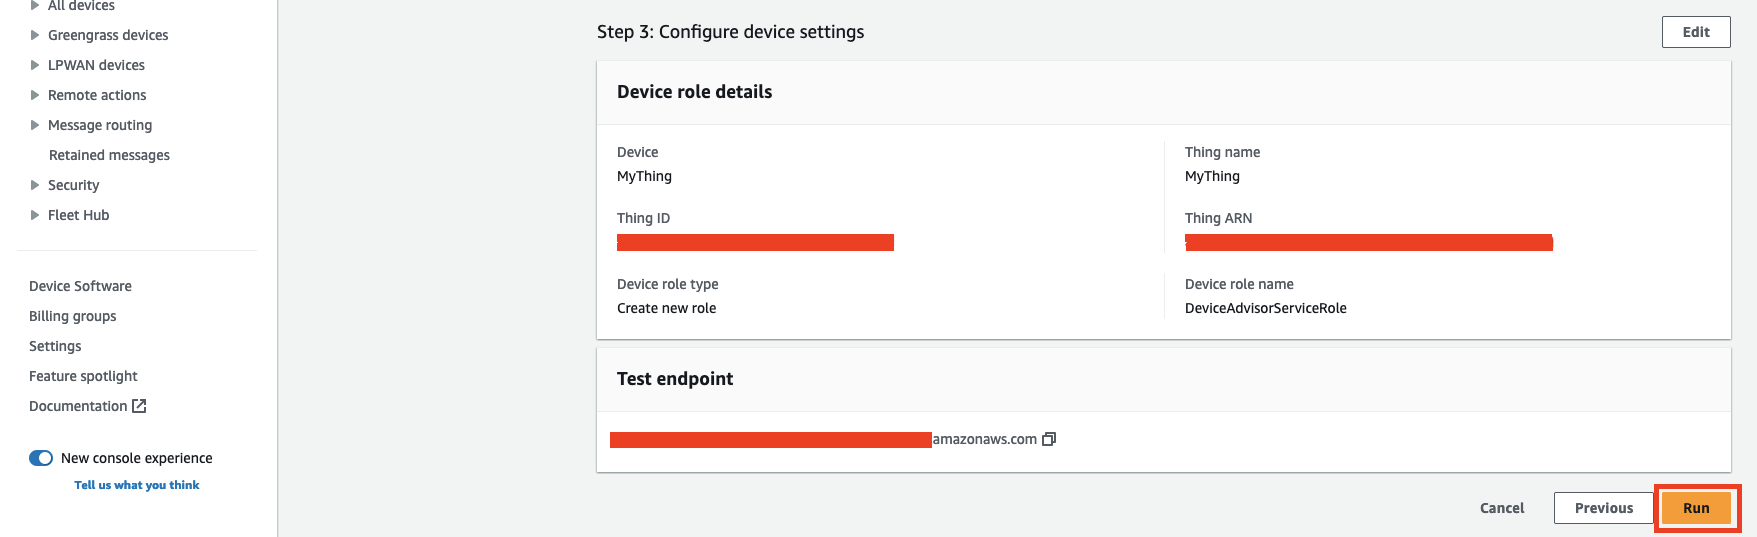 
                        A device configuration console that shows device role details, test endpoint, 
                            and options to cancel, go back, or run.
                    